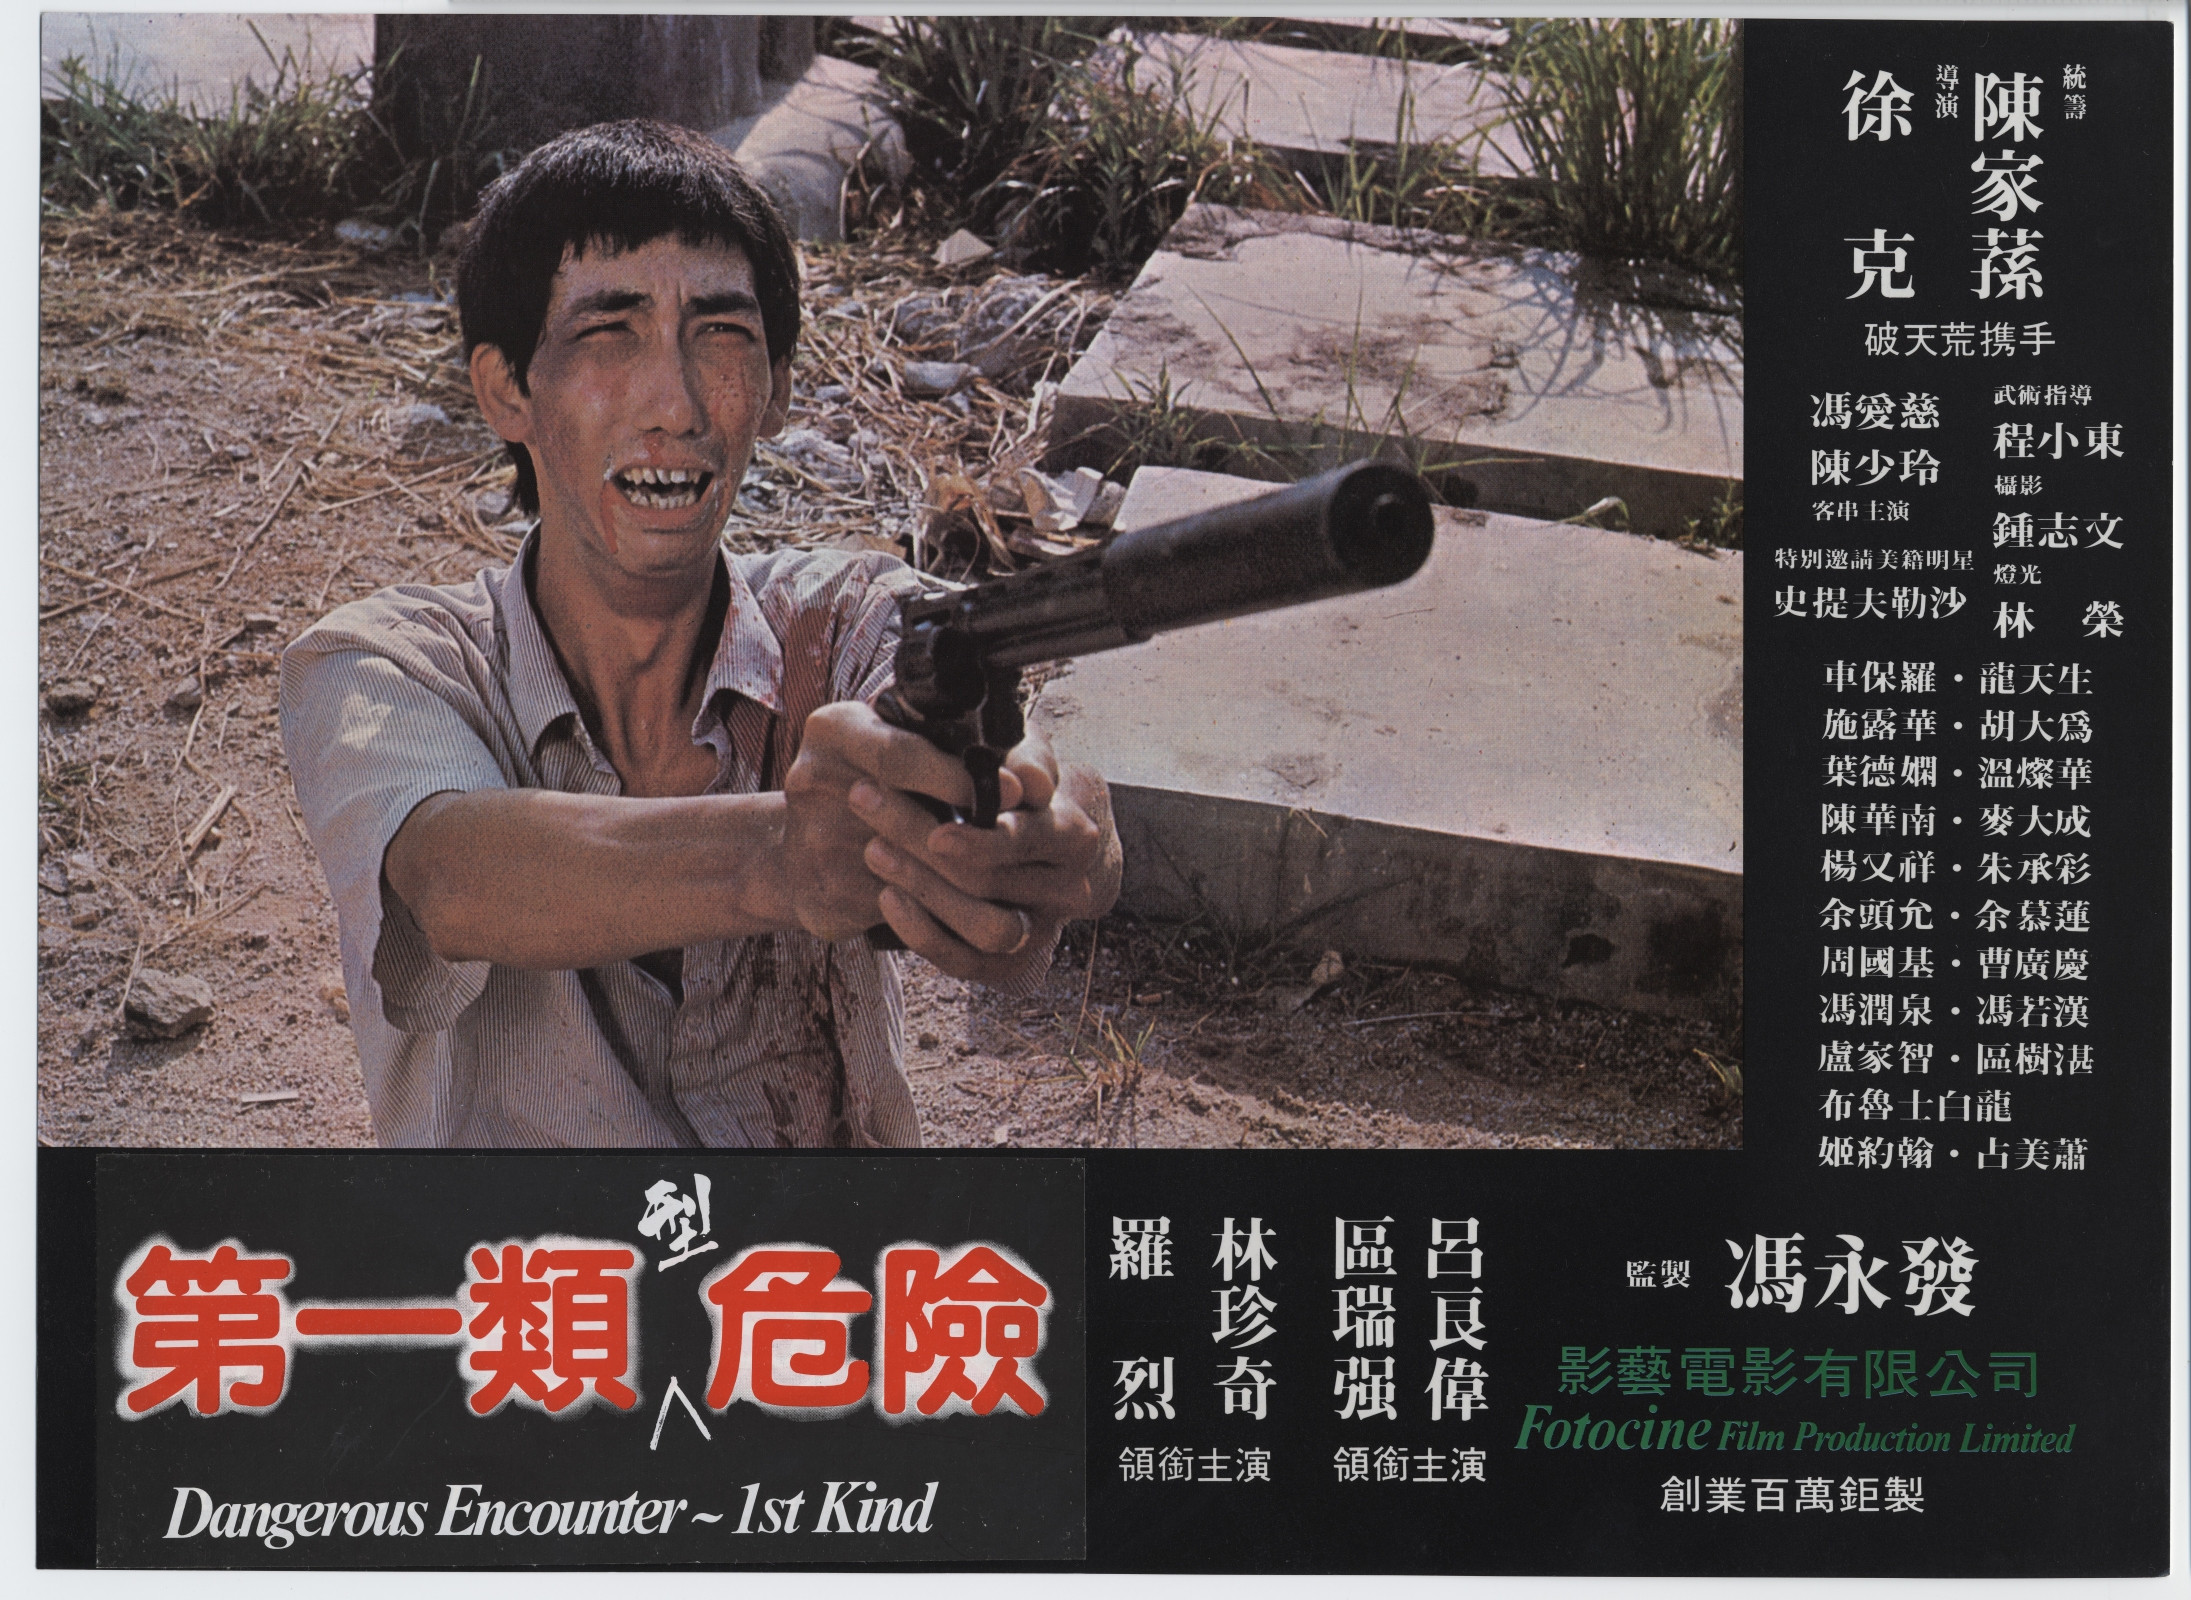 Che Bo-law in a still from “Dangerous Encounters of the First Kind”, one of two highly nihilistic films Hong Kong director Tsui Hark shot in 1980, the other being “We Are Going to Eat You”, a satire on cannibalism.